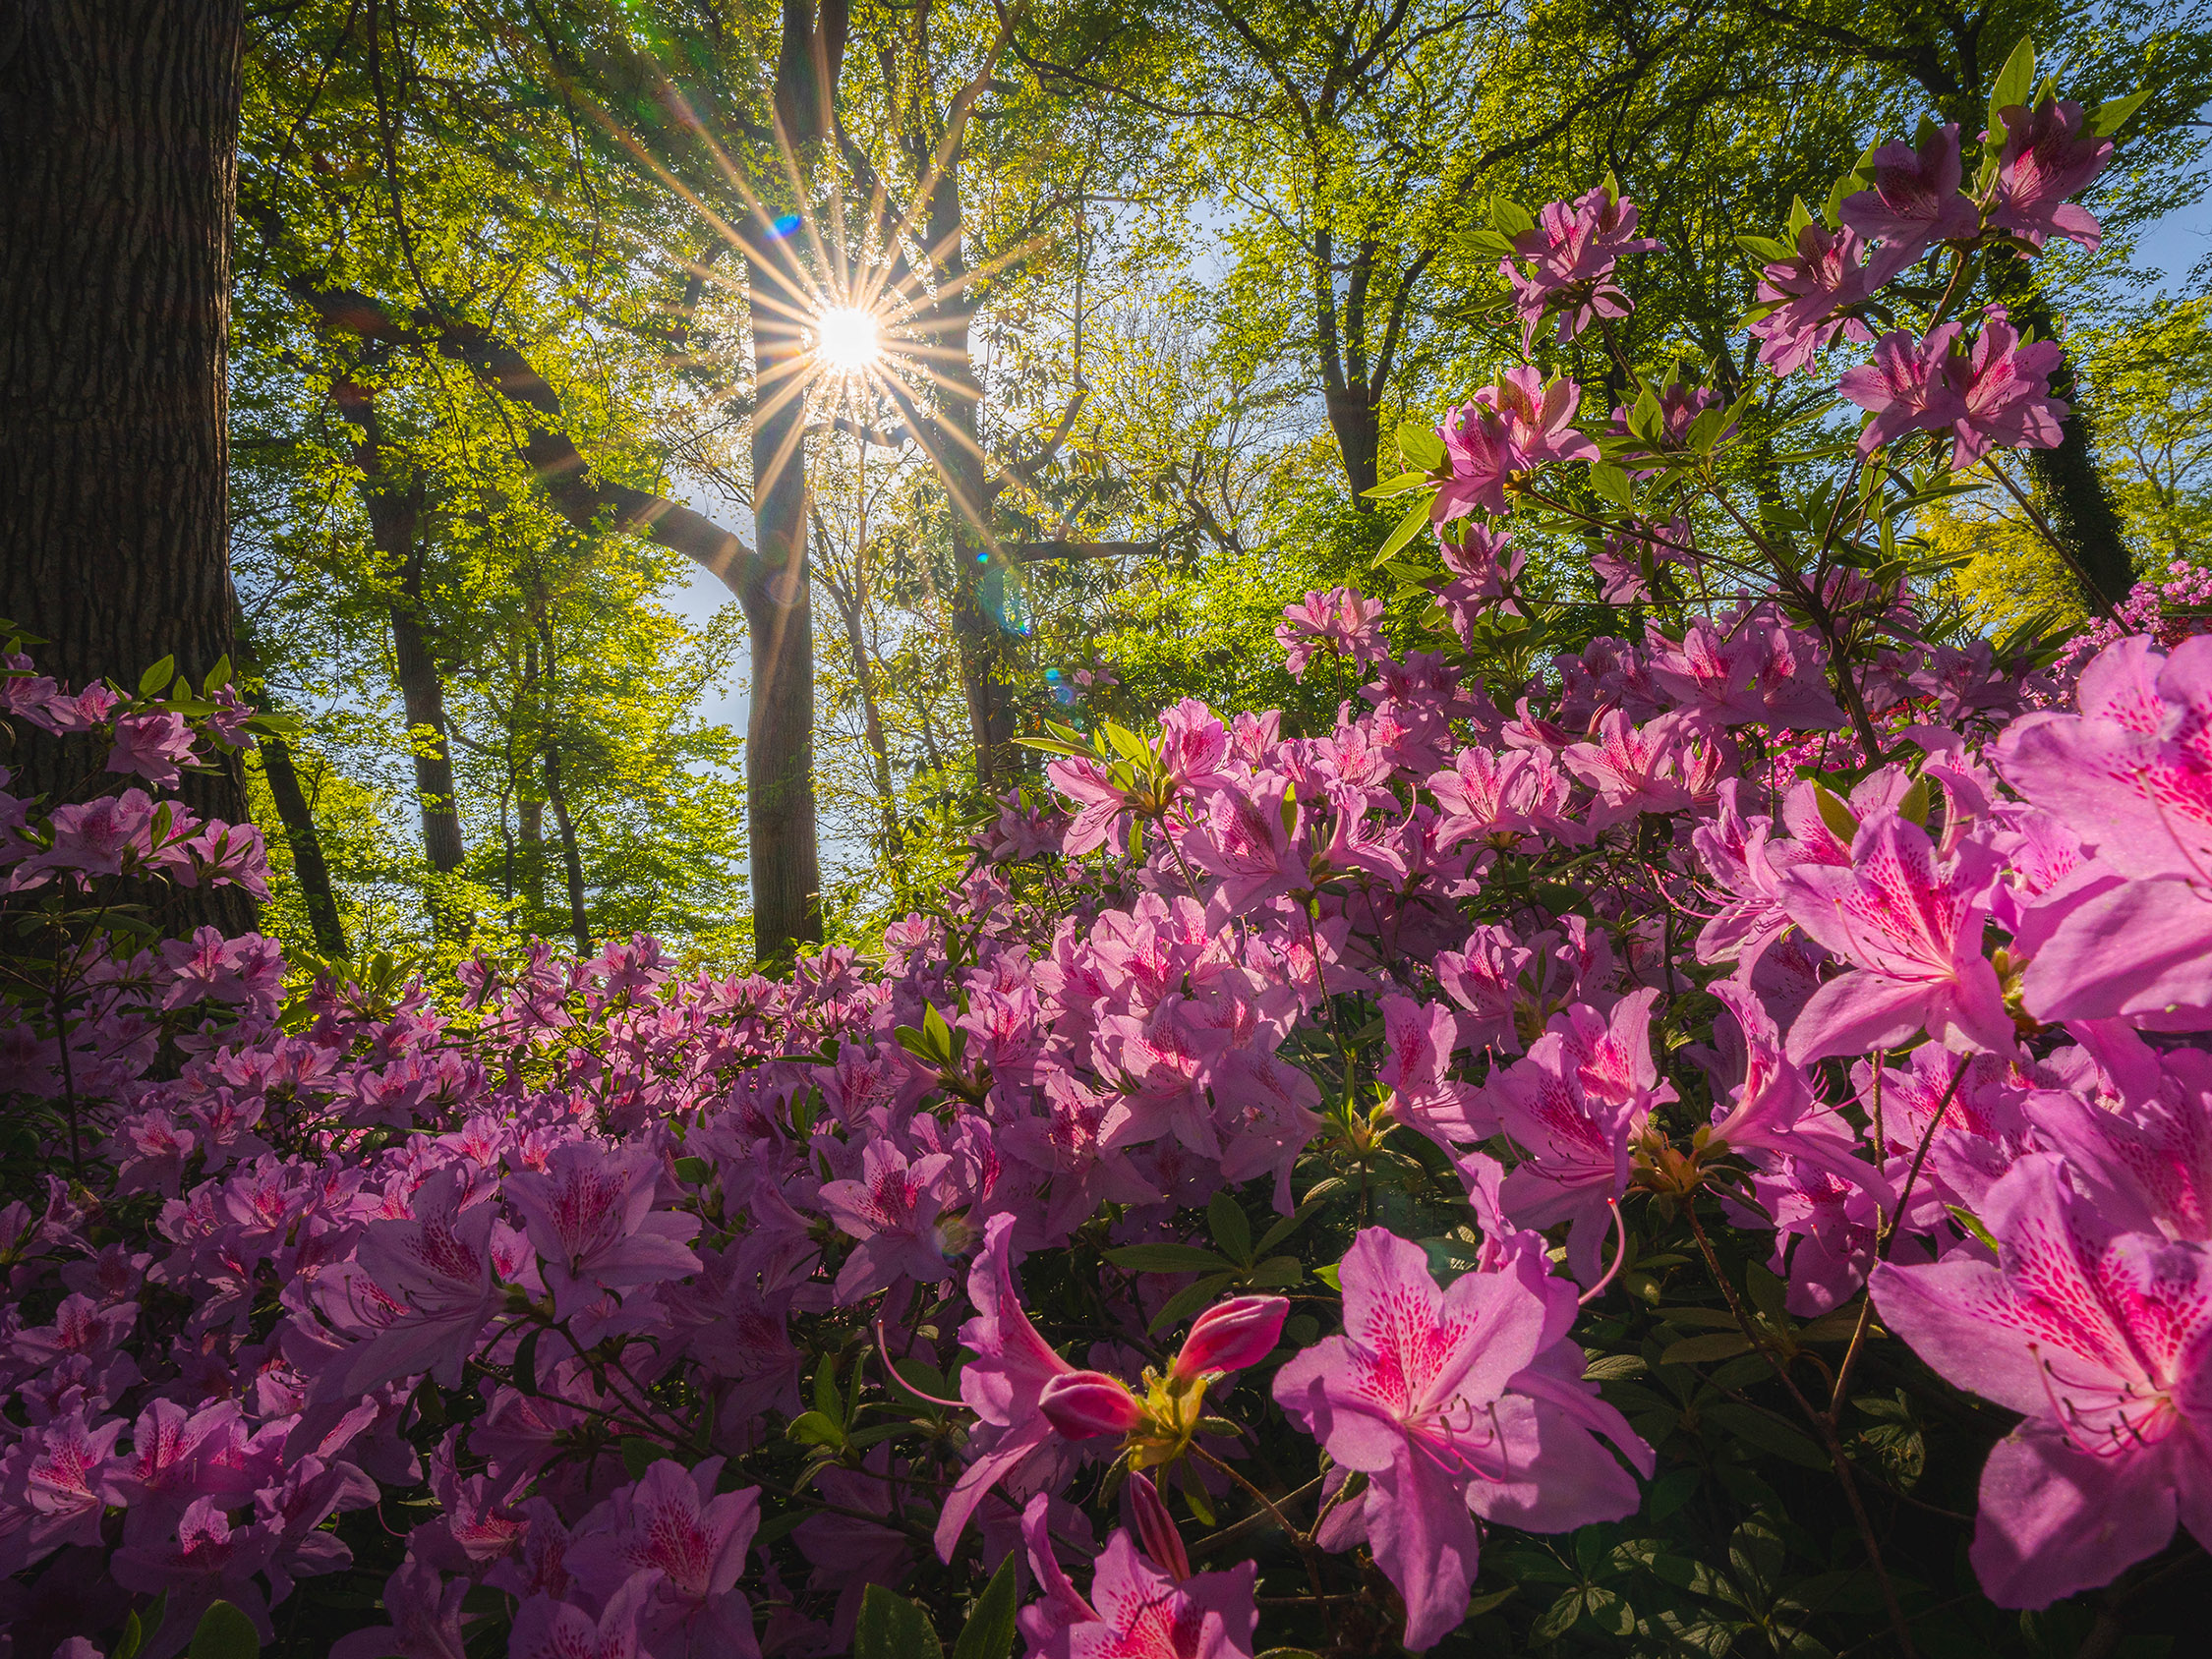 Bright fuchsia flowers bloom in a sunny forest setting